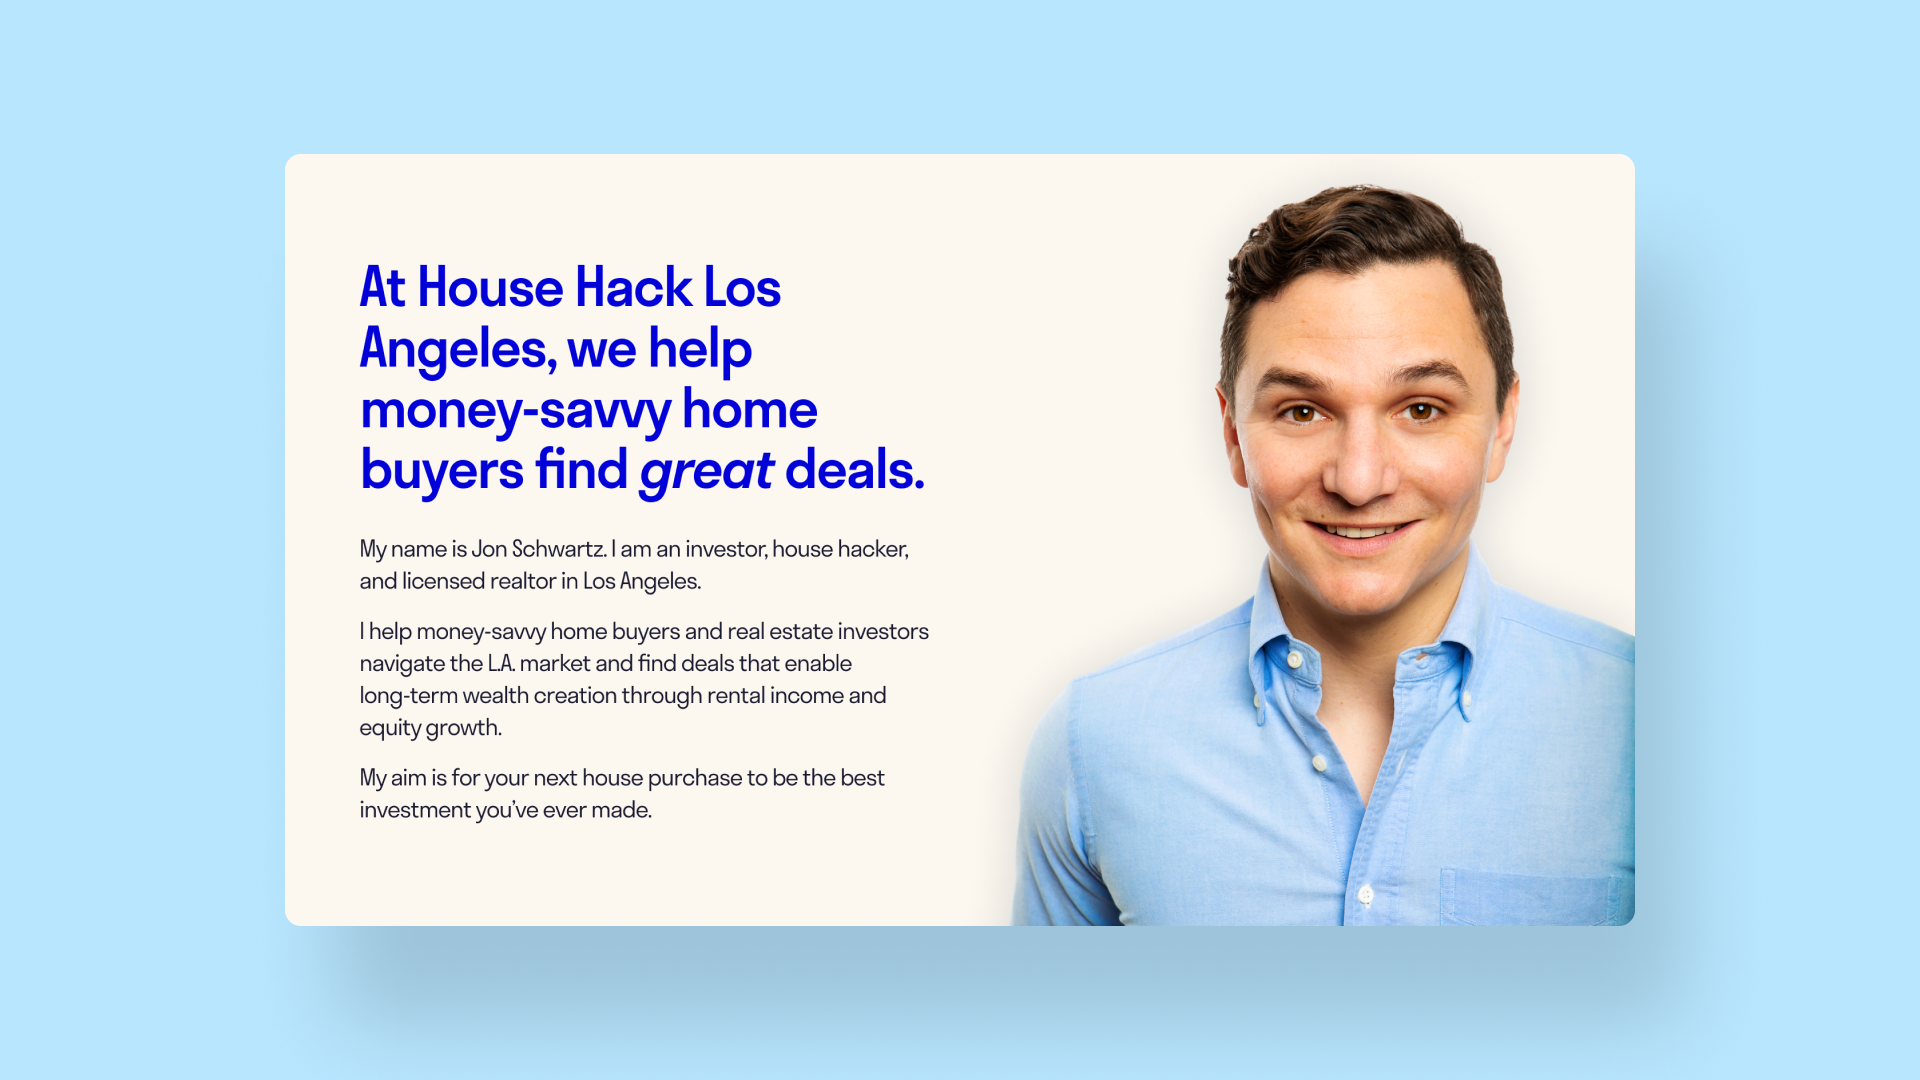 UI component explaining what House Hack Los Angeles does